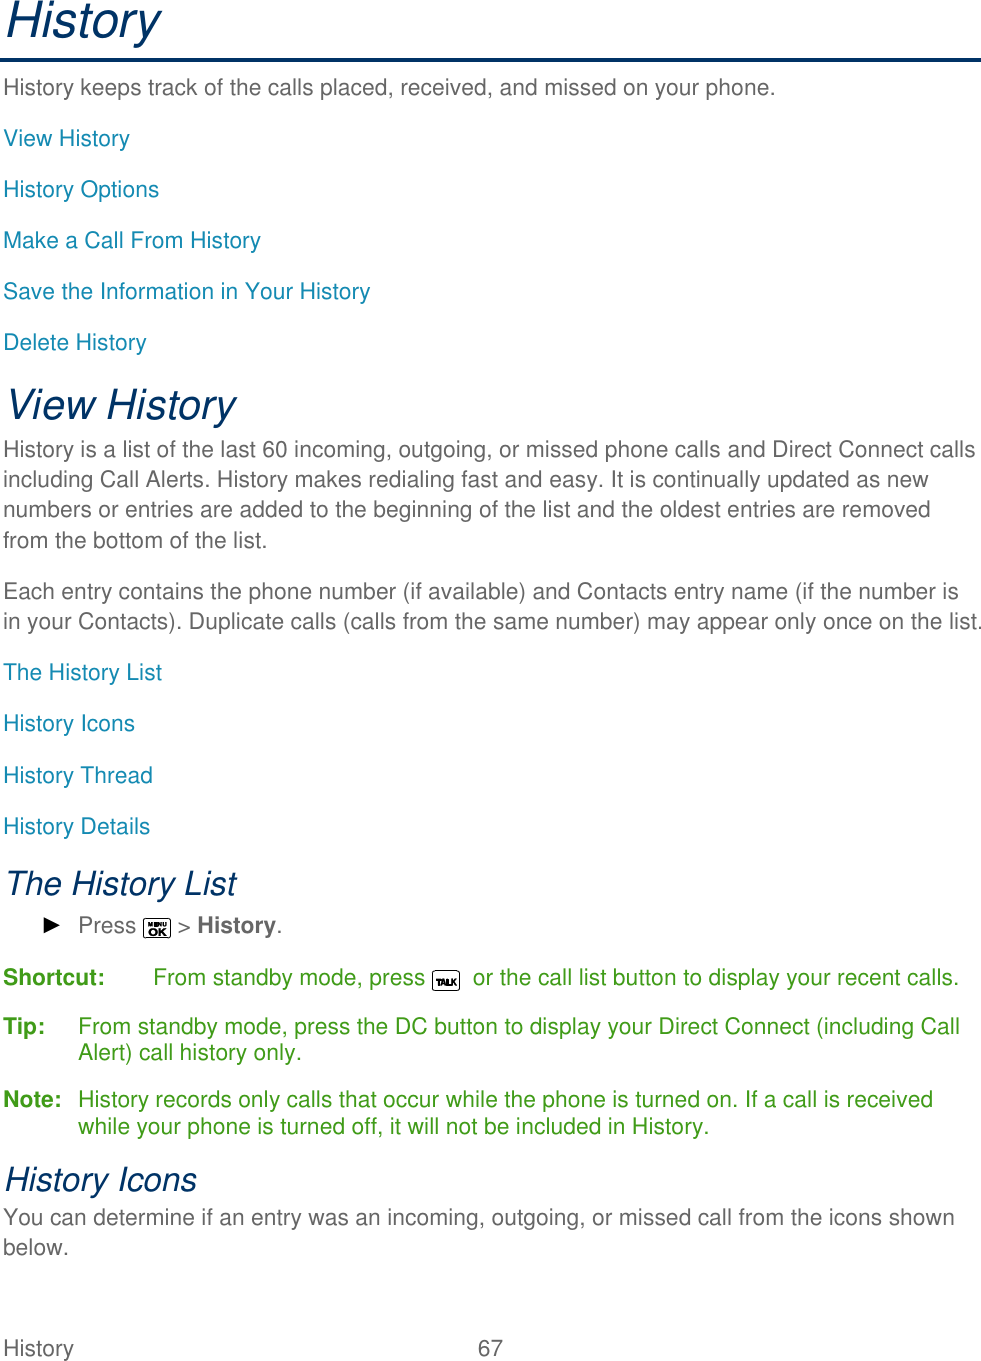  History   67   History History keeps track of the calls placed, received, and missed on your phone. View History History Options Make a Call From History Save the Information in Your History Delete History View History  History is a list of the last 60 incoming, outgoing, or missed phone calls and Direct Connect calls including Call Alerts. History makes redialing fast and easy. It is continually updated as new numbers or entries are added to the beginning of the list and the oldest entries are removed from the bottom of the list. Each entry contains the phone number (if available) and Contacts entry name (if the number is in your Contacts). Duplicate calls (calls from the same number) may appear only once on the list. The History List History Icons History Thread History Details The History List ► Press   &gt; History. Shortcut:   From standby mode, press    or the call list button to display your recent calls. Tip:  From standby mode, press the DC button to display your Direct Connect (including Call Alert) call history only. Note:  History records only calls that occur while the phone is turned on. If a call is received while your phone is turned off, it will not be included in History. History Icons You can determine if an entry was an incoming, outgoing, or missed call from the icons shown below. 